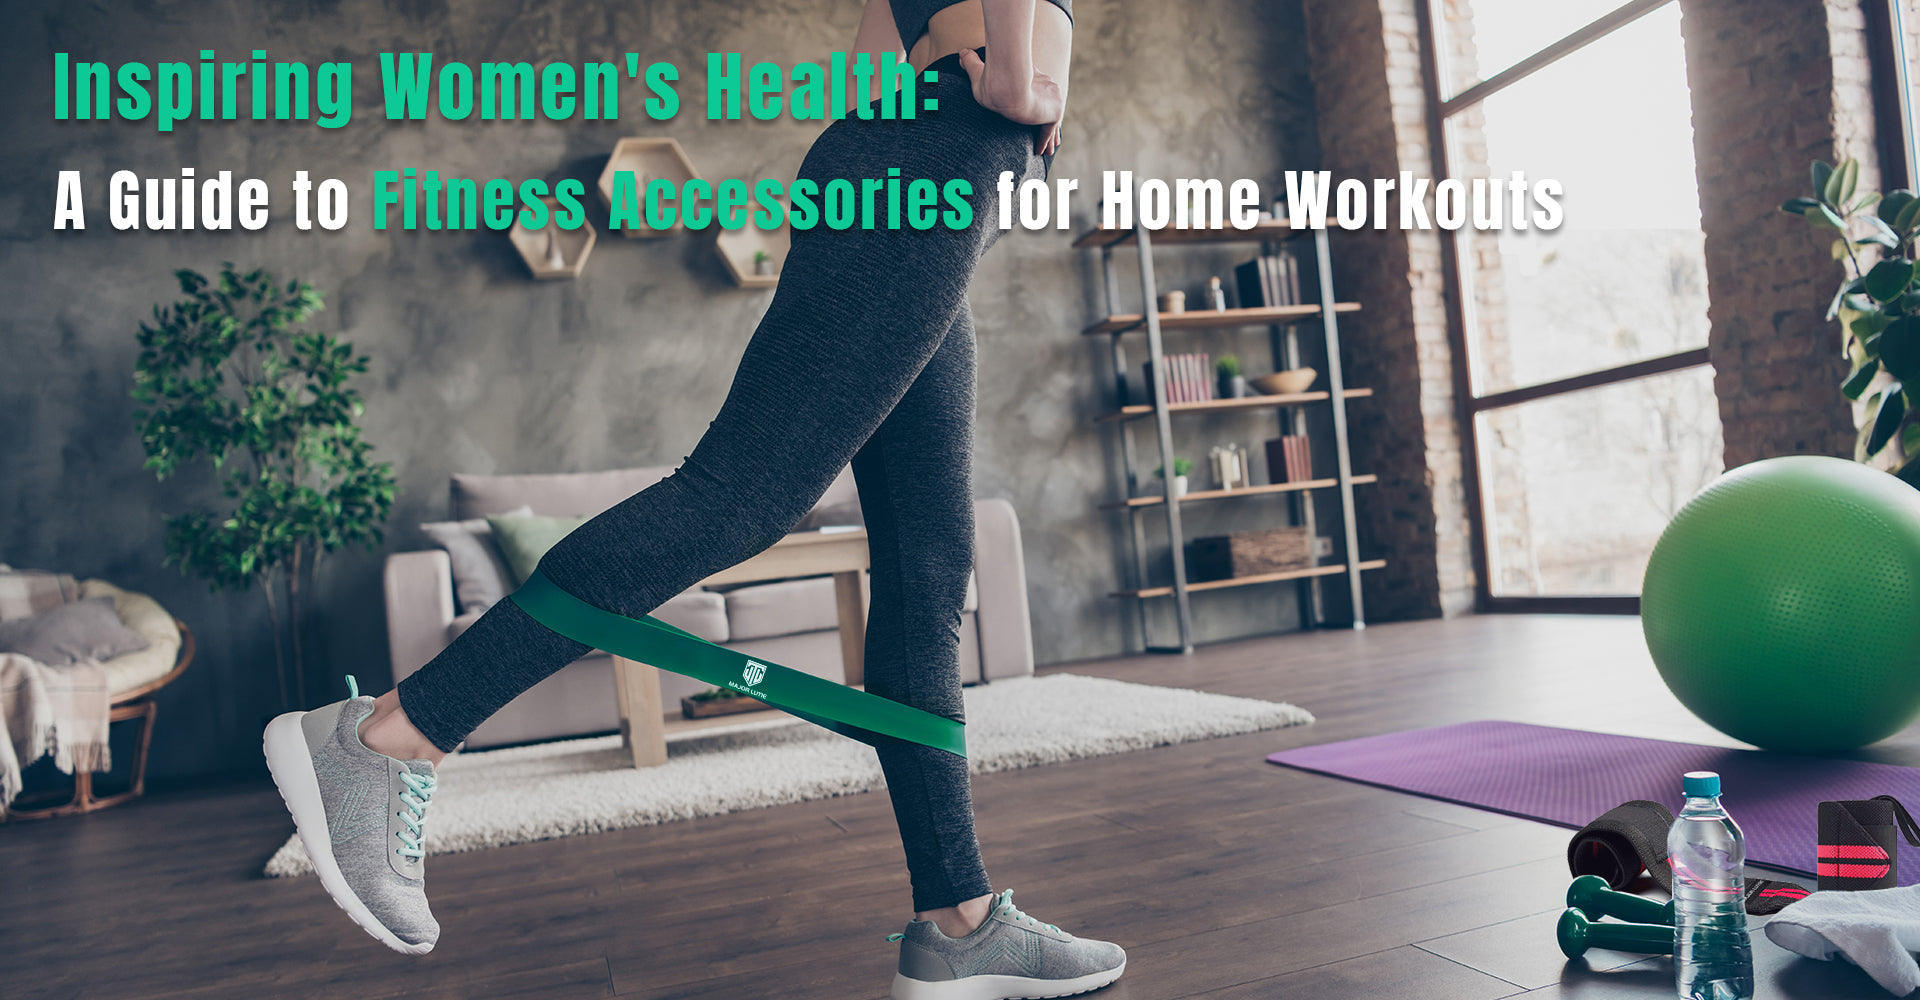 Inspiring Women's Health: A Guide to Fitness Accessories for Home Workouts